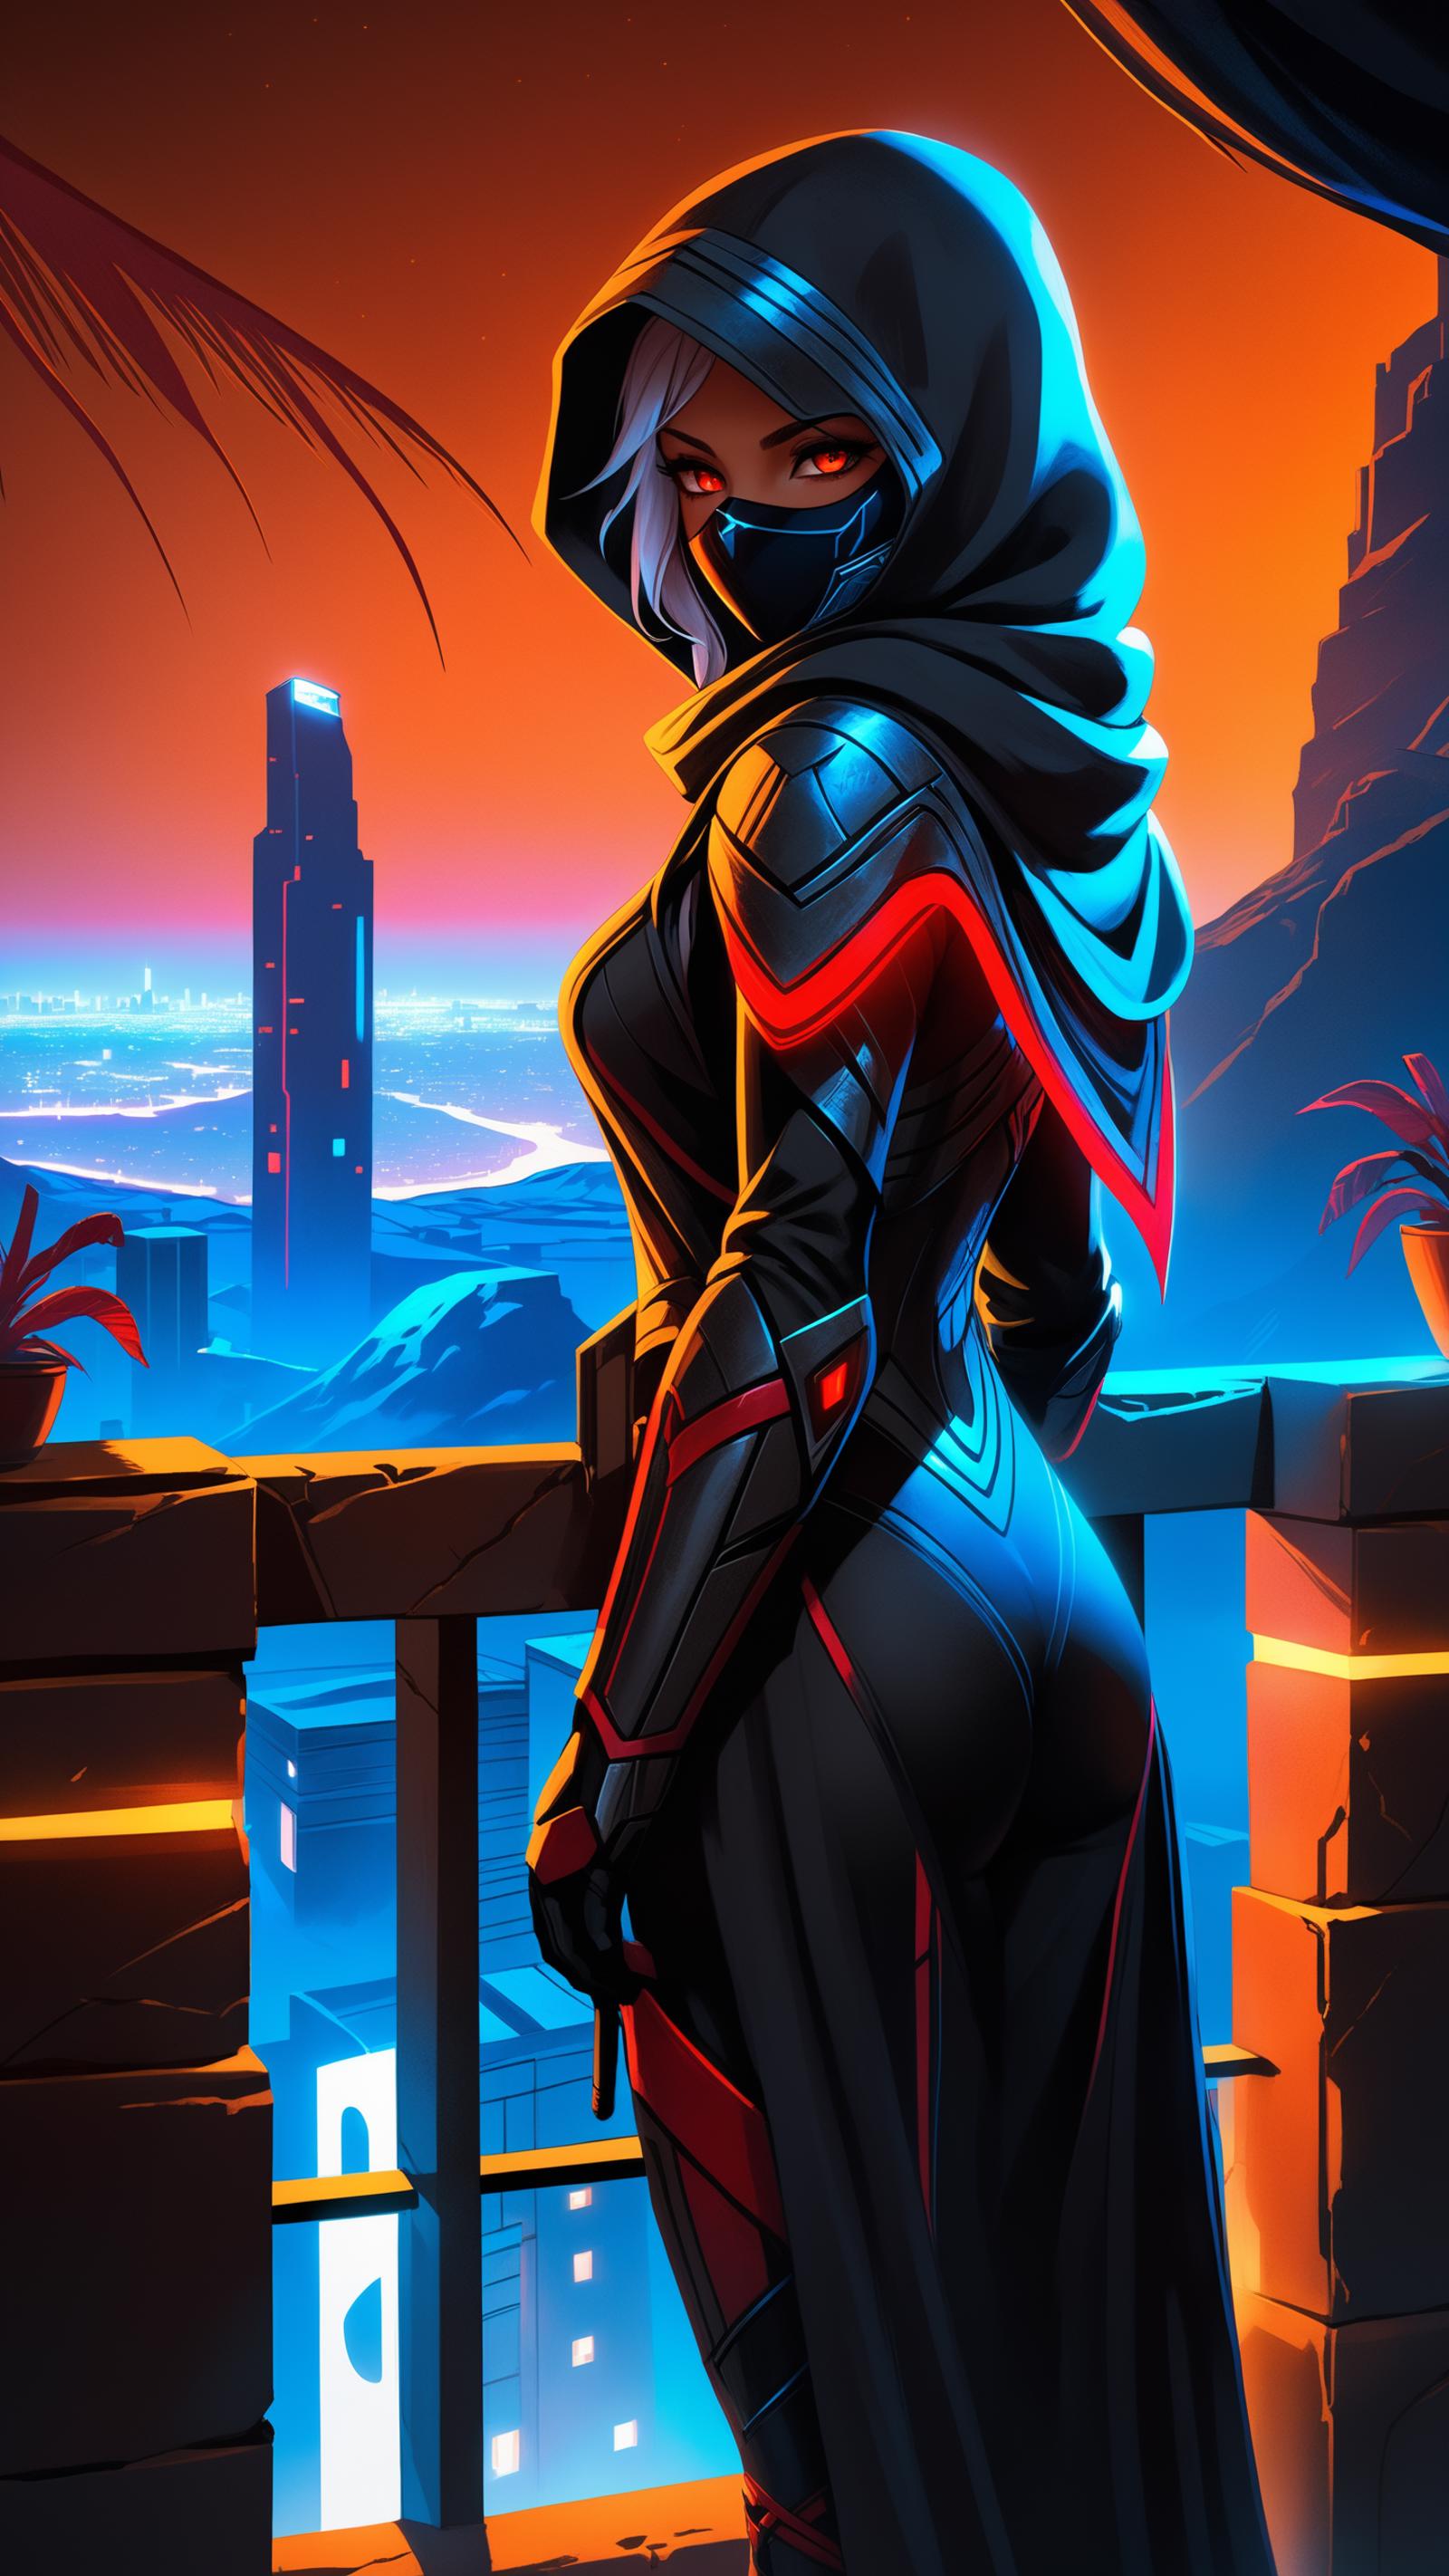 A woman in a black and red costume stands on a balcony at sunset.